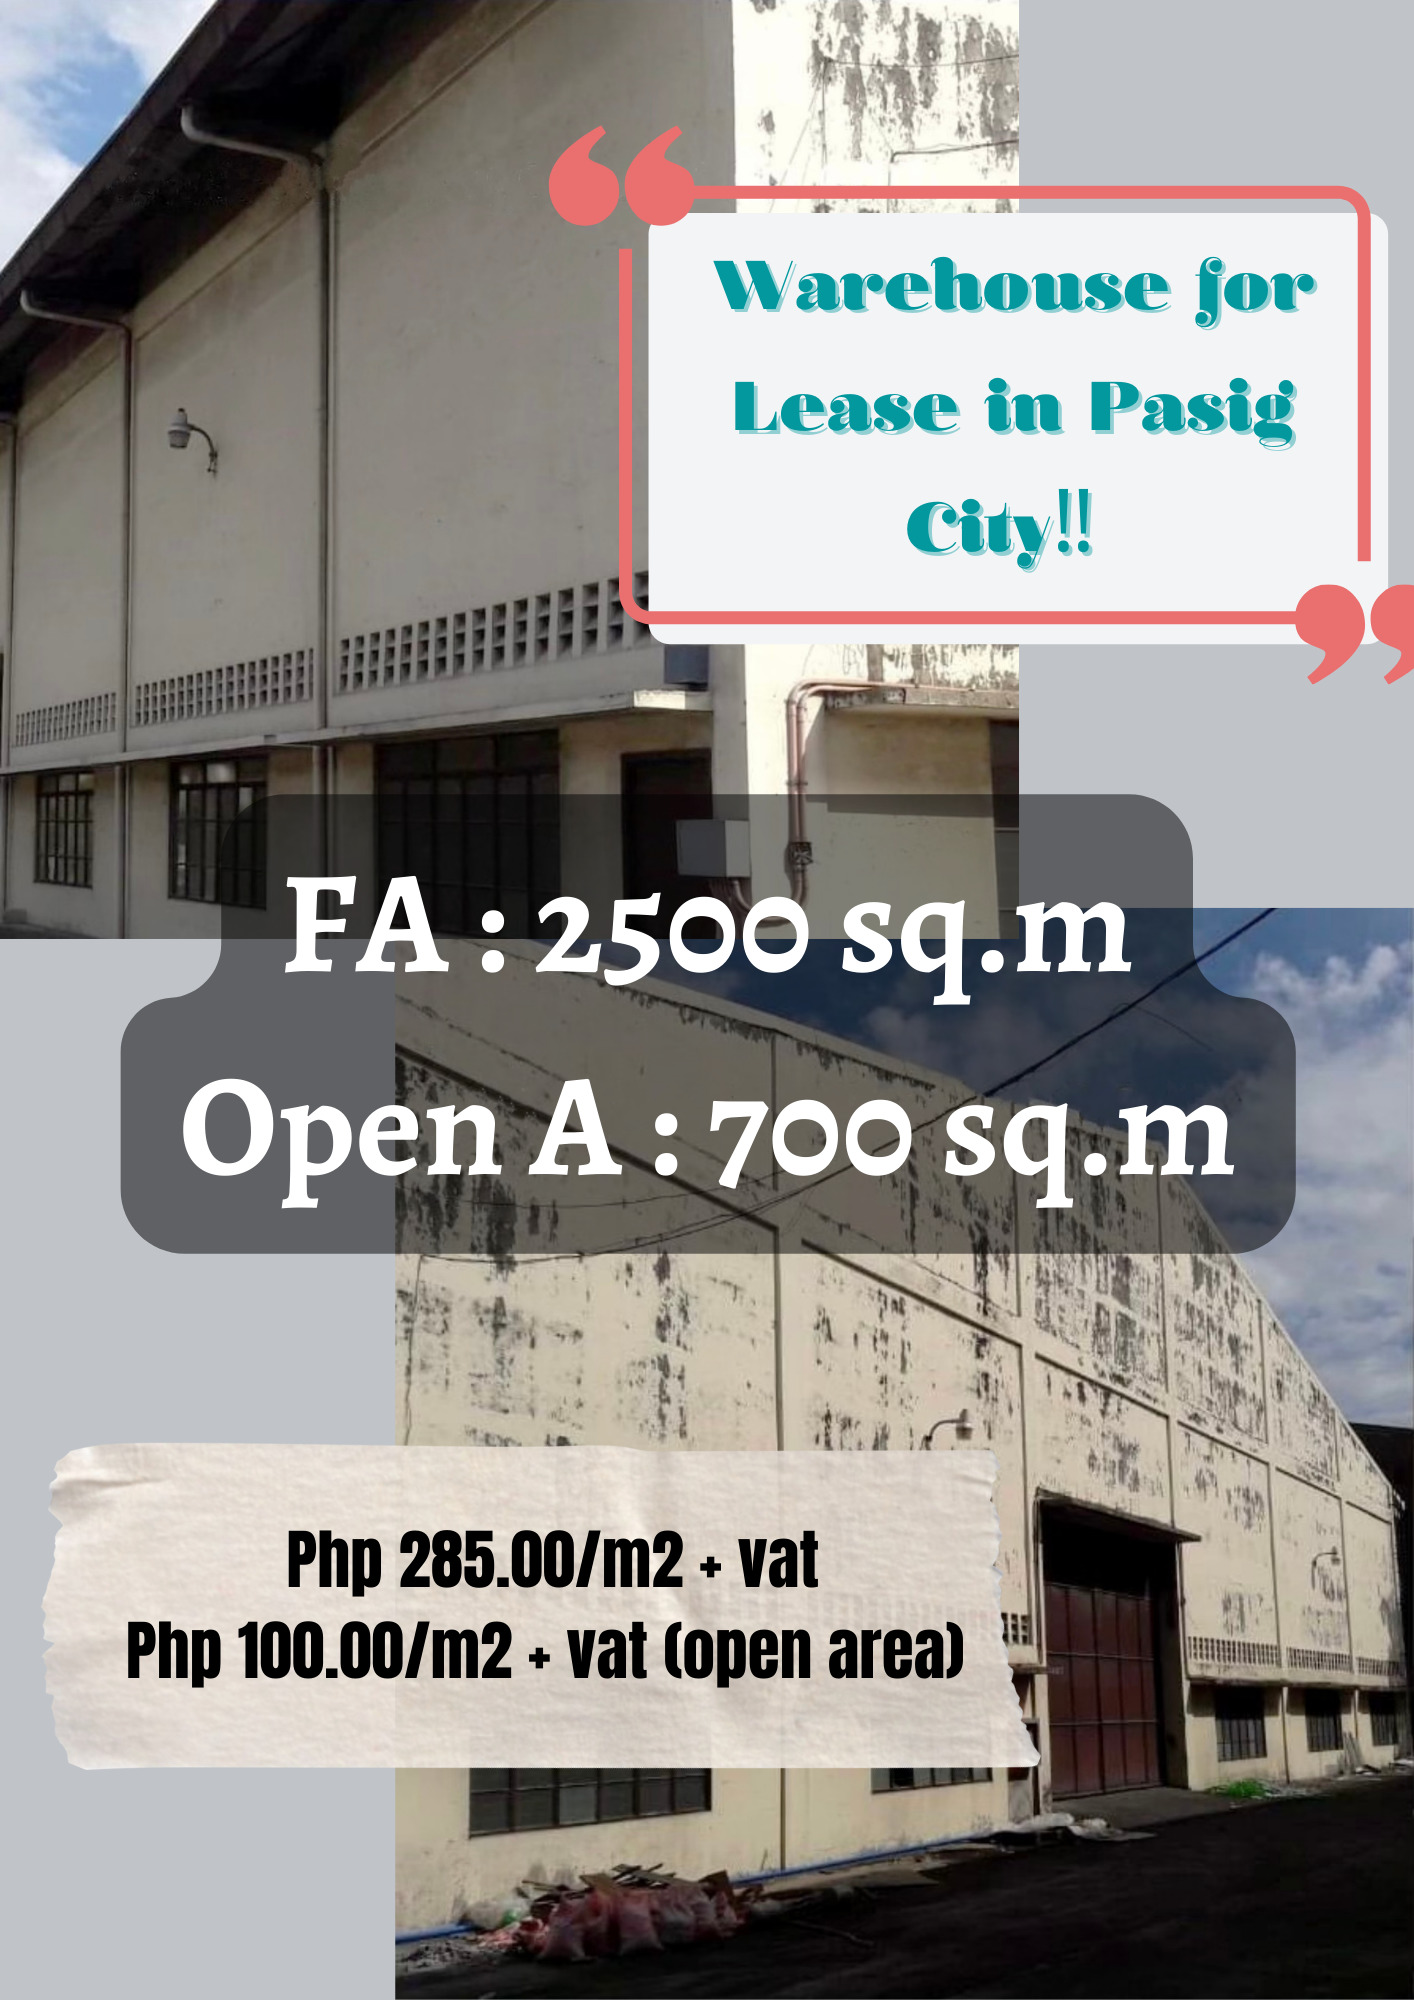 Warehouse for Lease in Pasig City‼️